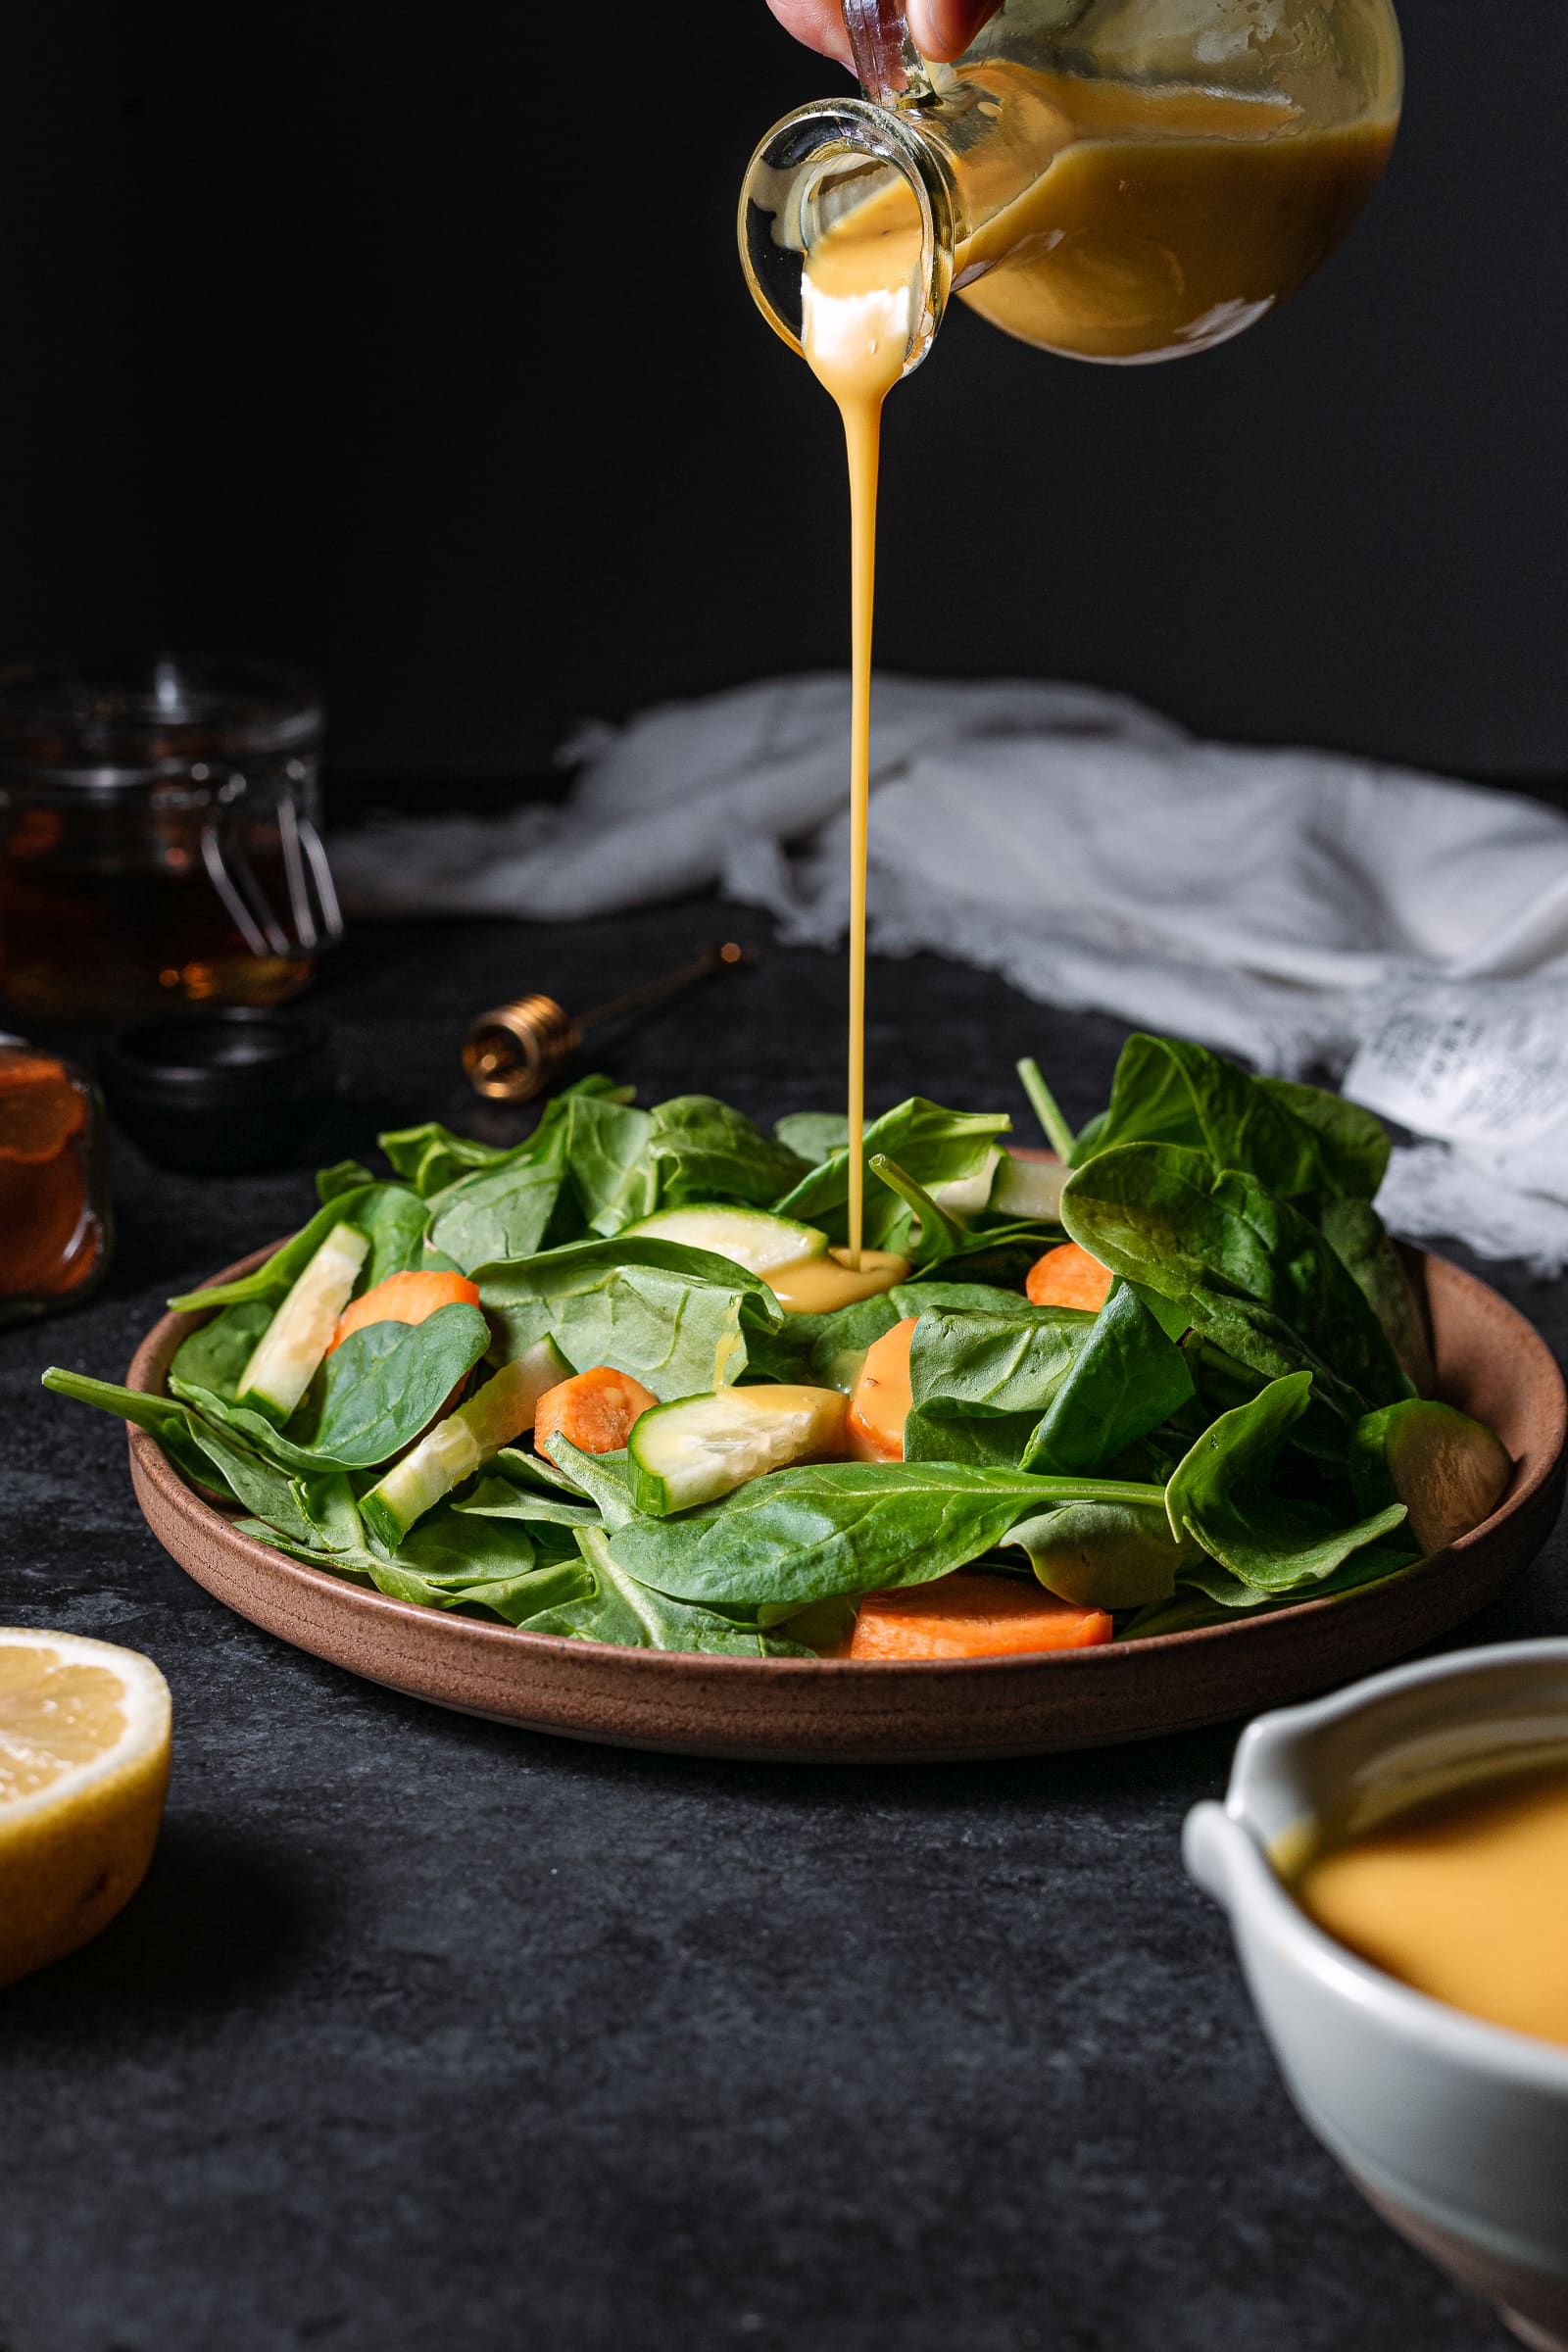 honey mustard being drizzled over spinach.